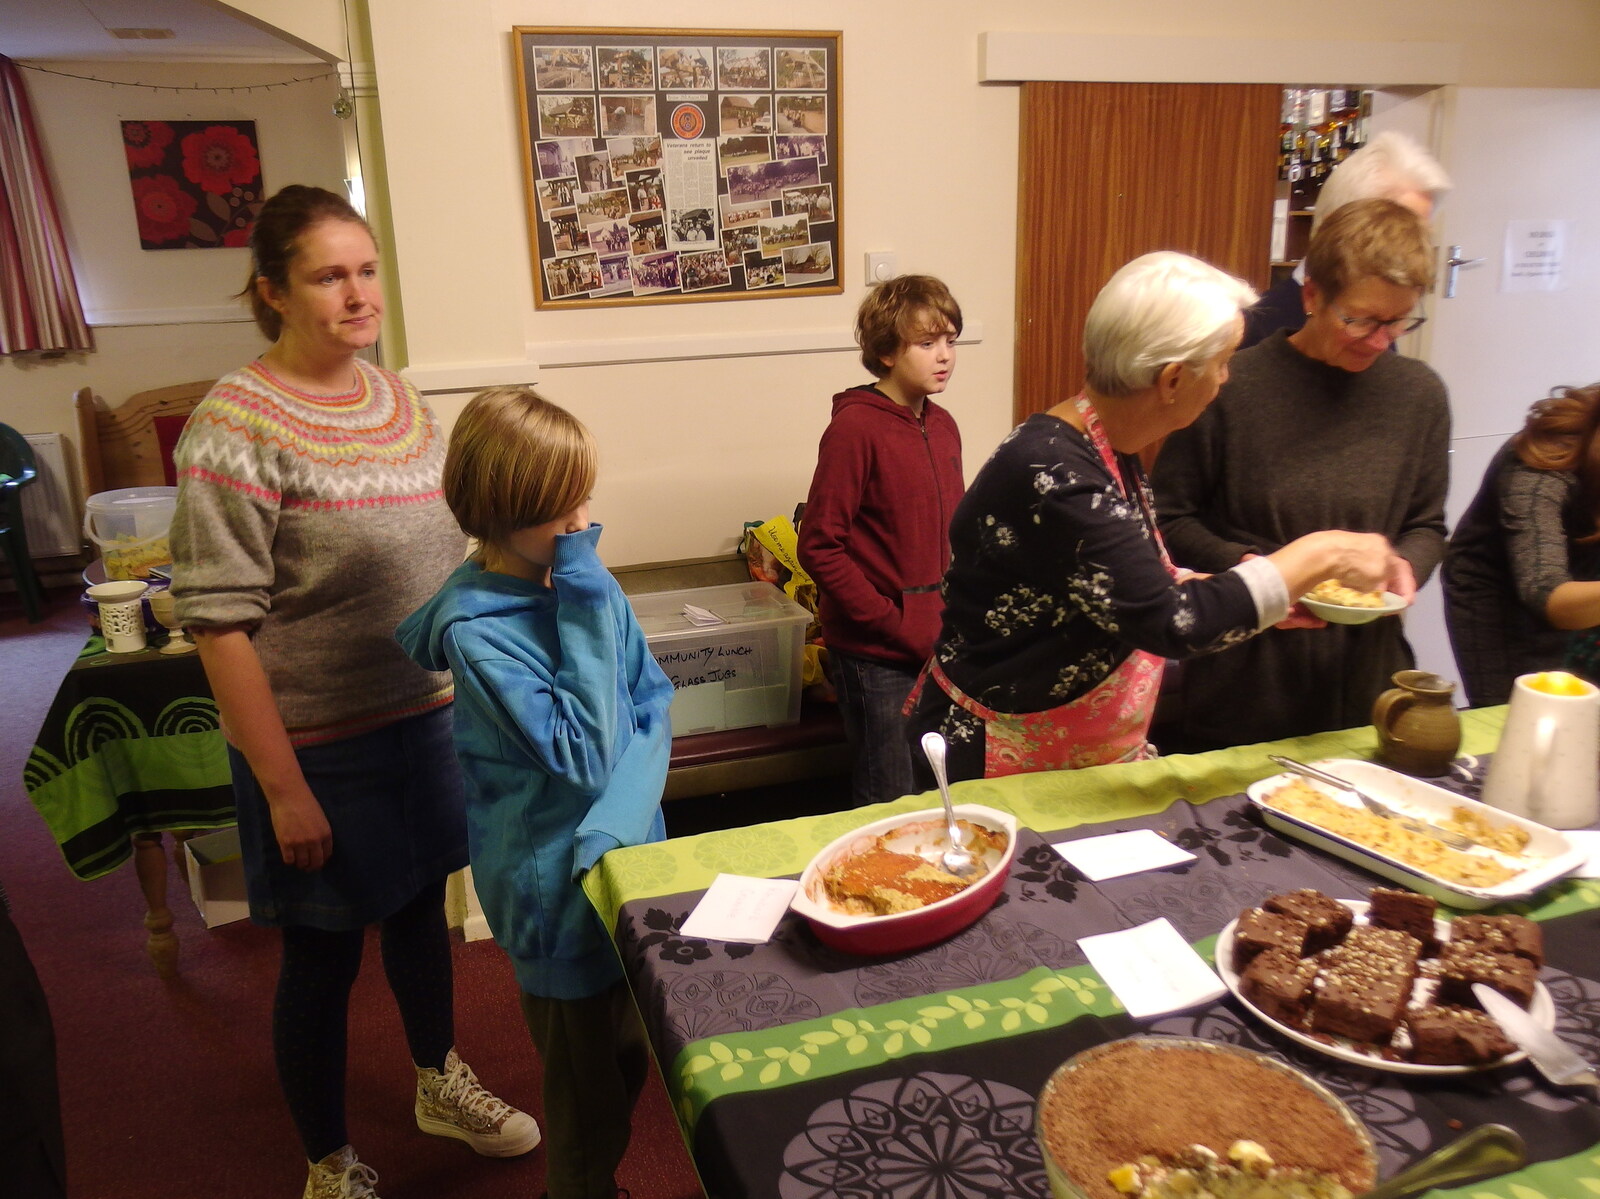 Harry and Isobel line up for pudding from Sunday Lunch at the Village Hall, Brome, Suffolk - 10th October 2021